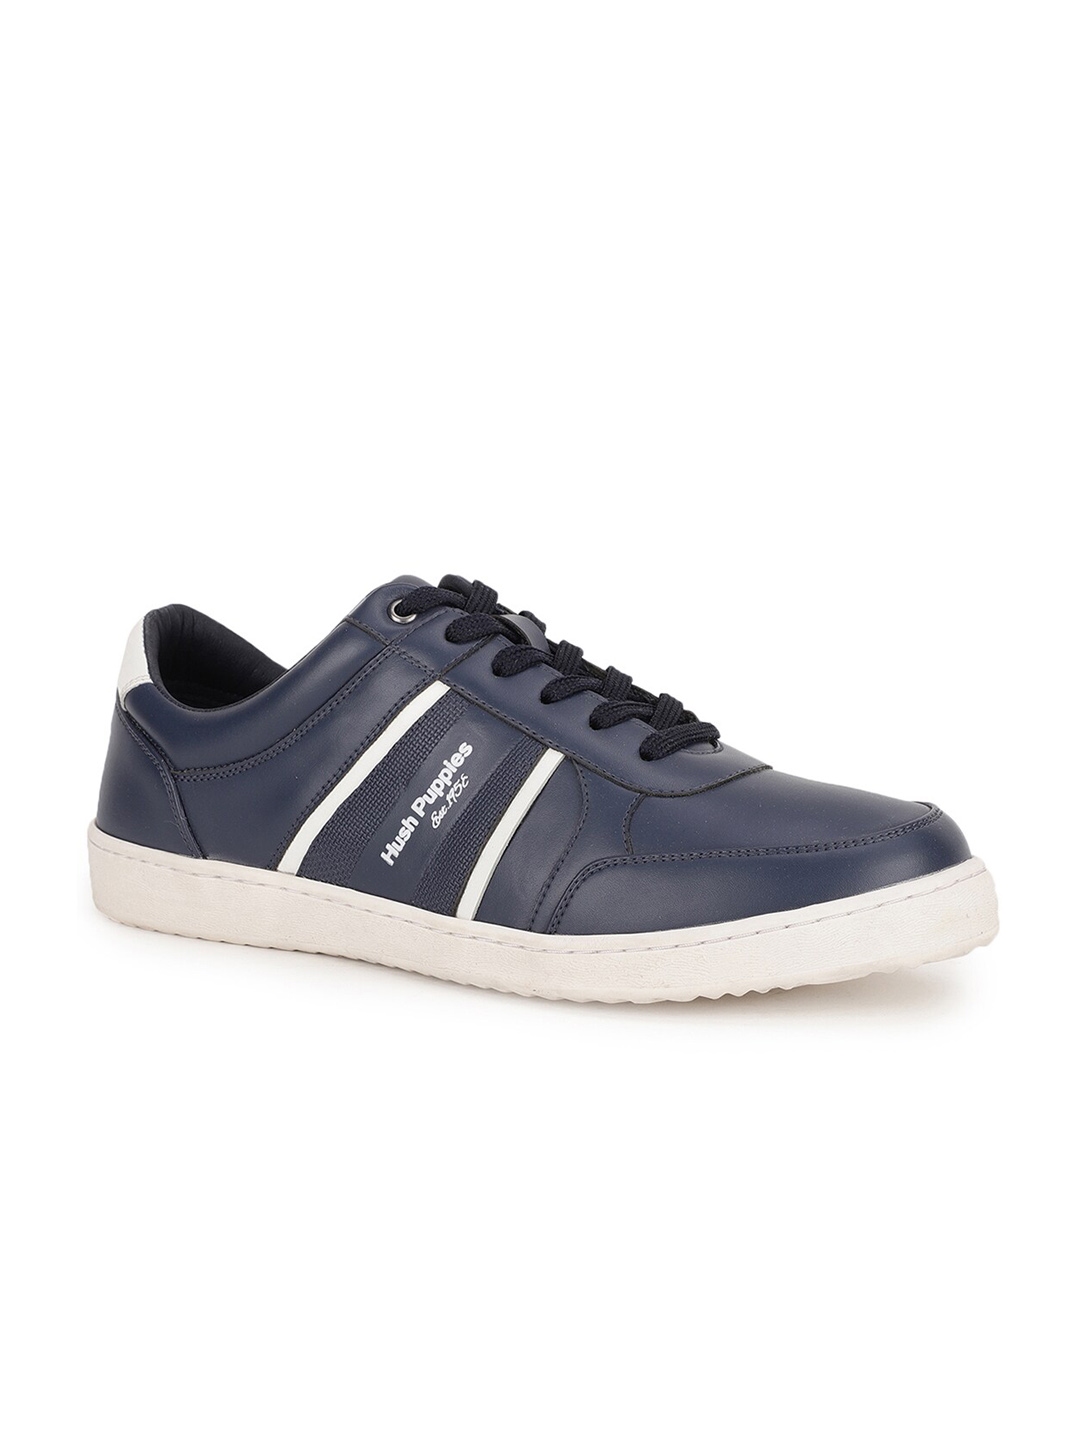 Buy Hush Puppies Men Blue Sneakers - Casual Shoes for Men 18250886 | Myntra